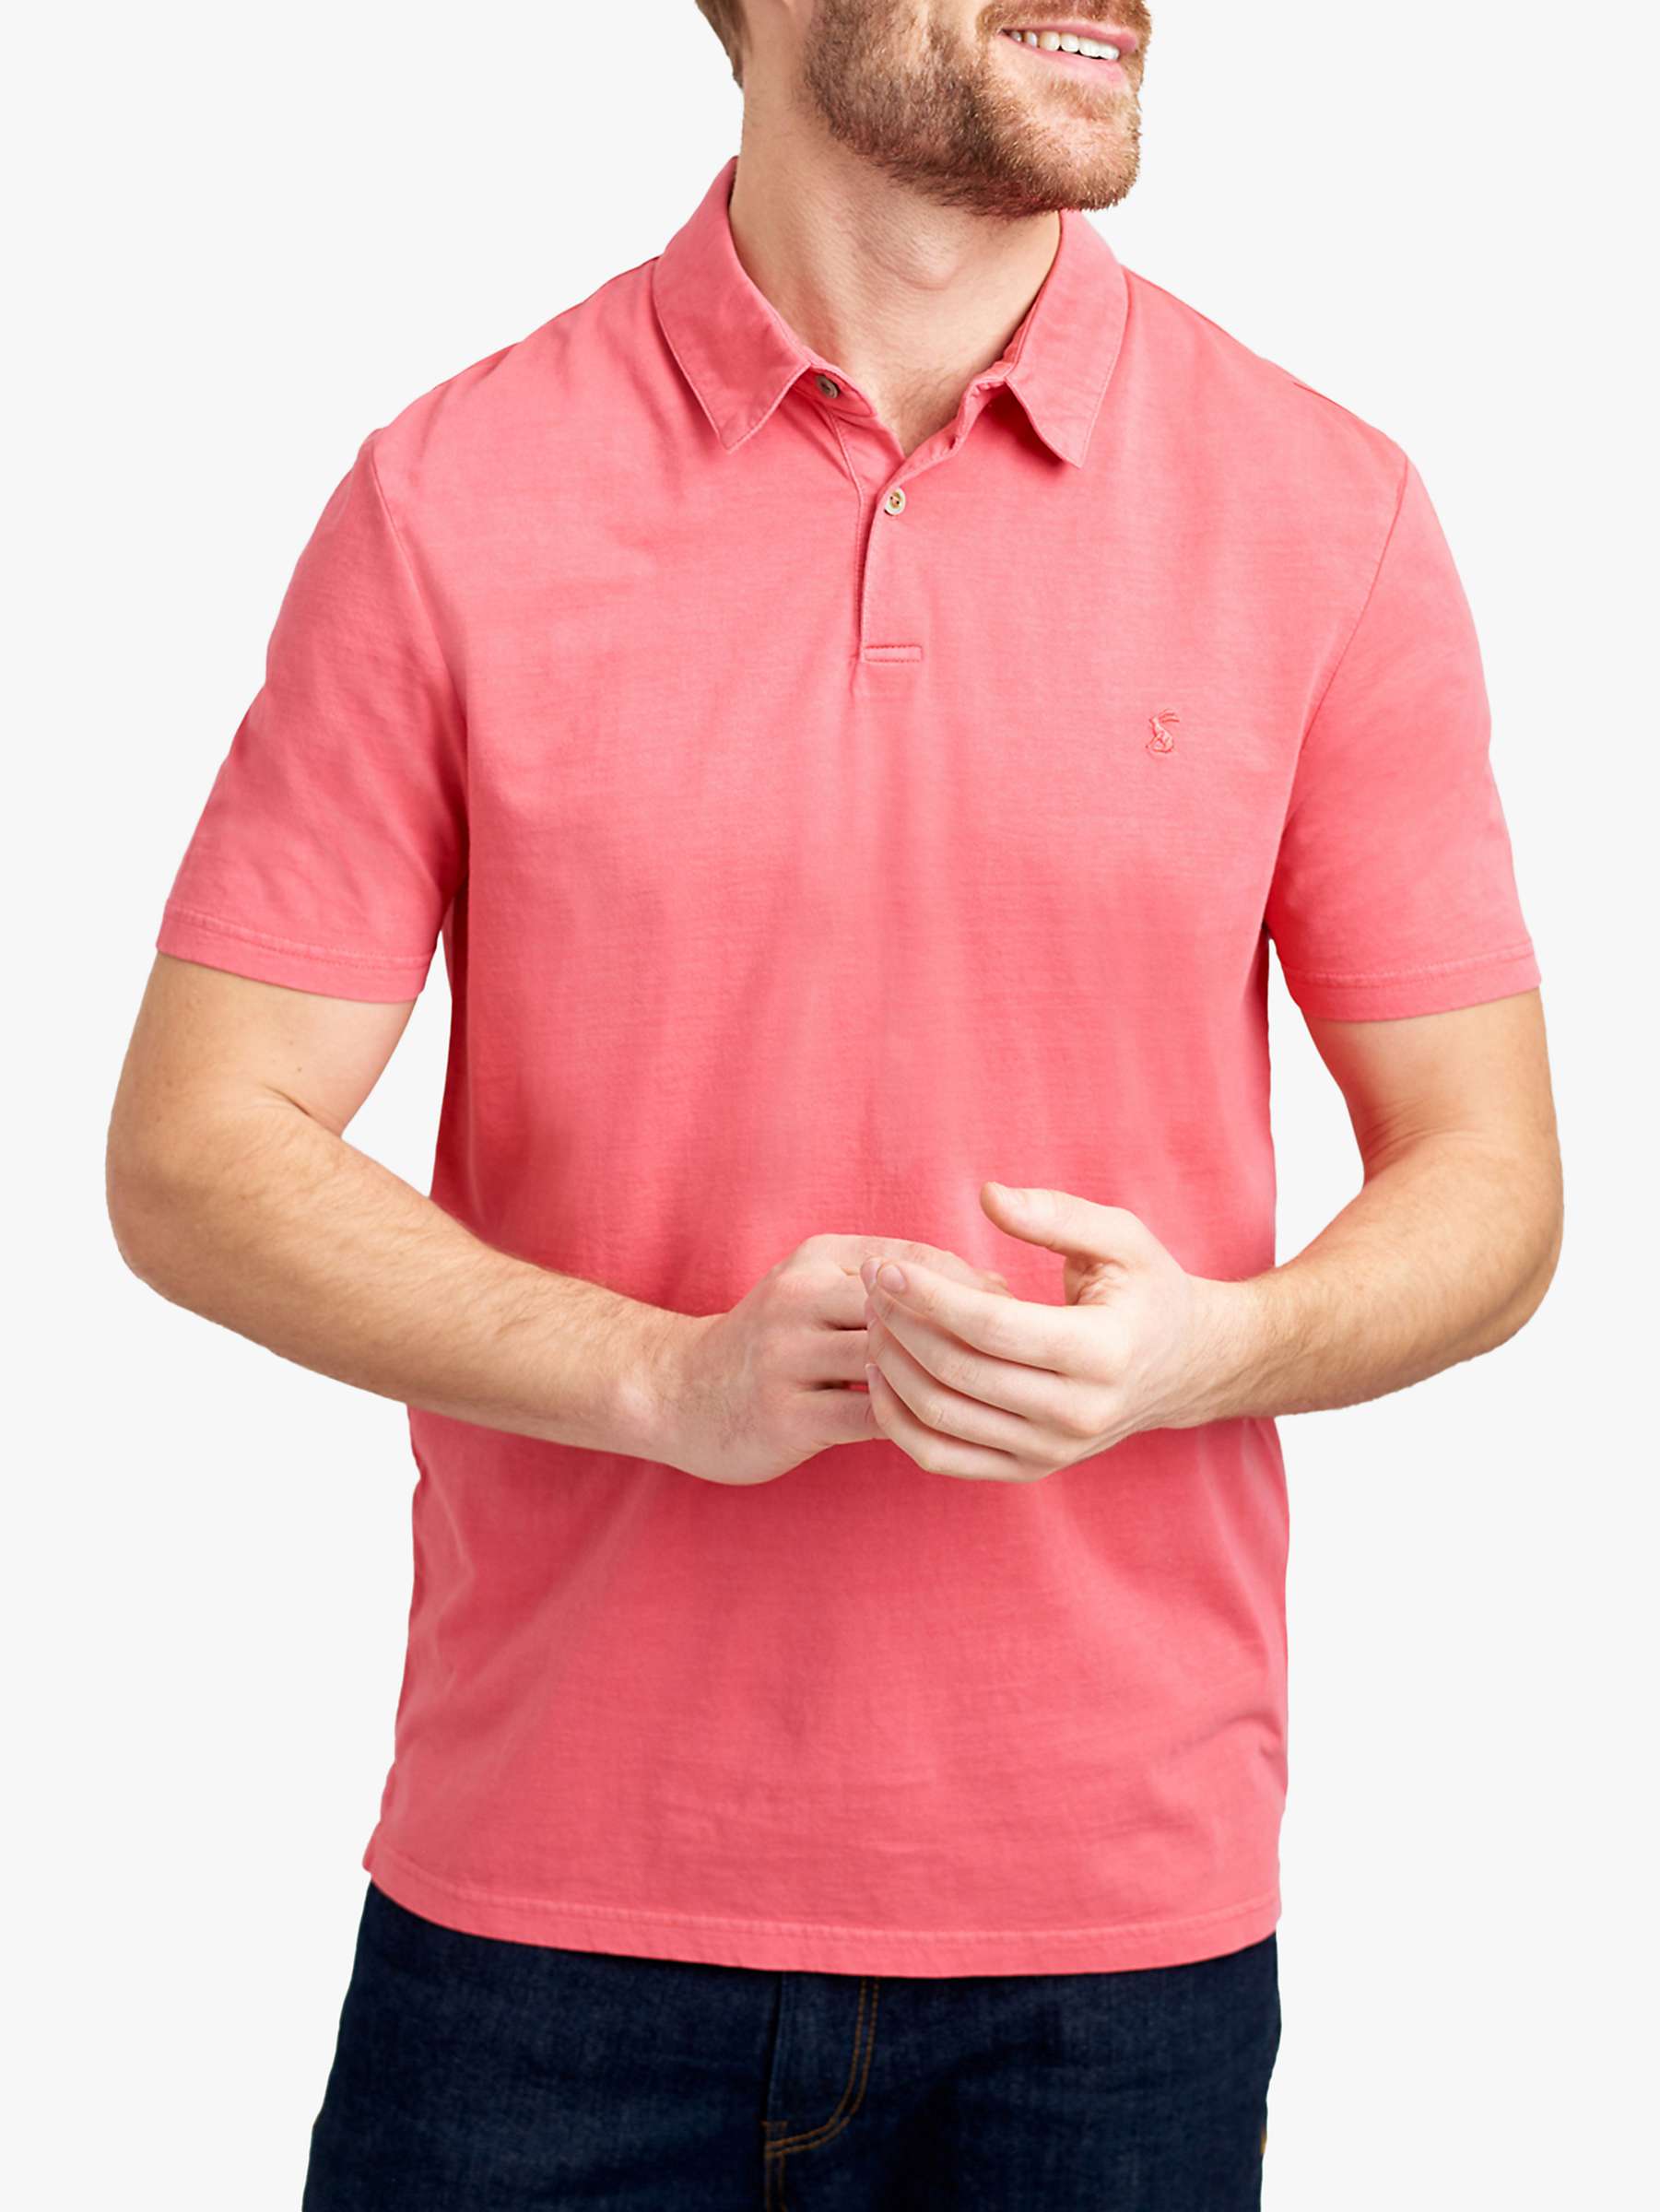 Buy Joules Laundered Polo Shirt Online at johnlewis.com